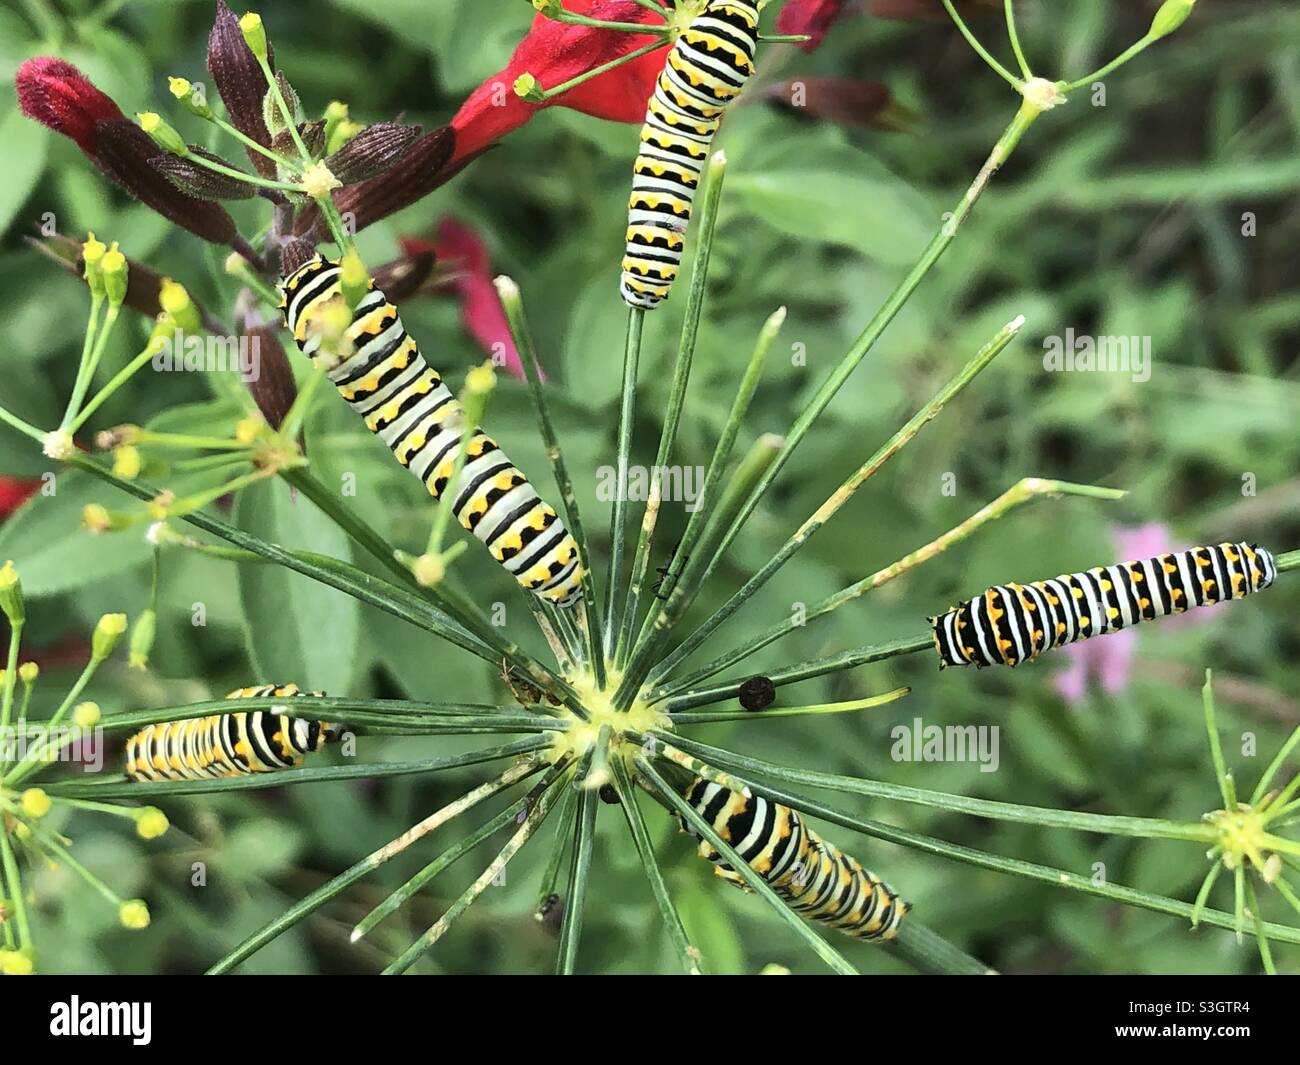 Eastern black swallowtail caterpillars on a dill plant Stock Photo